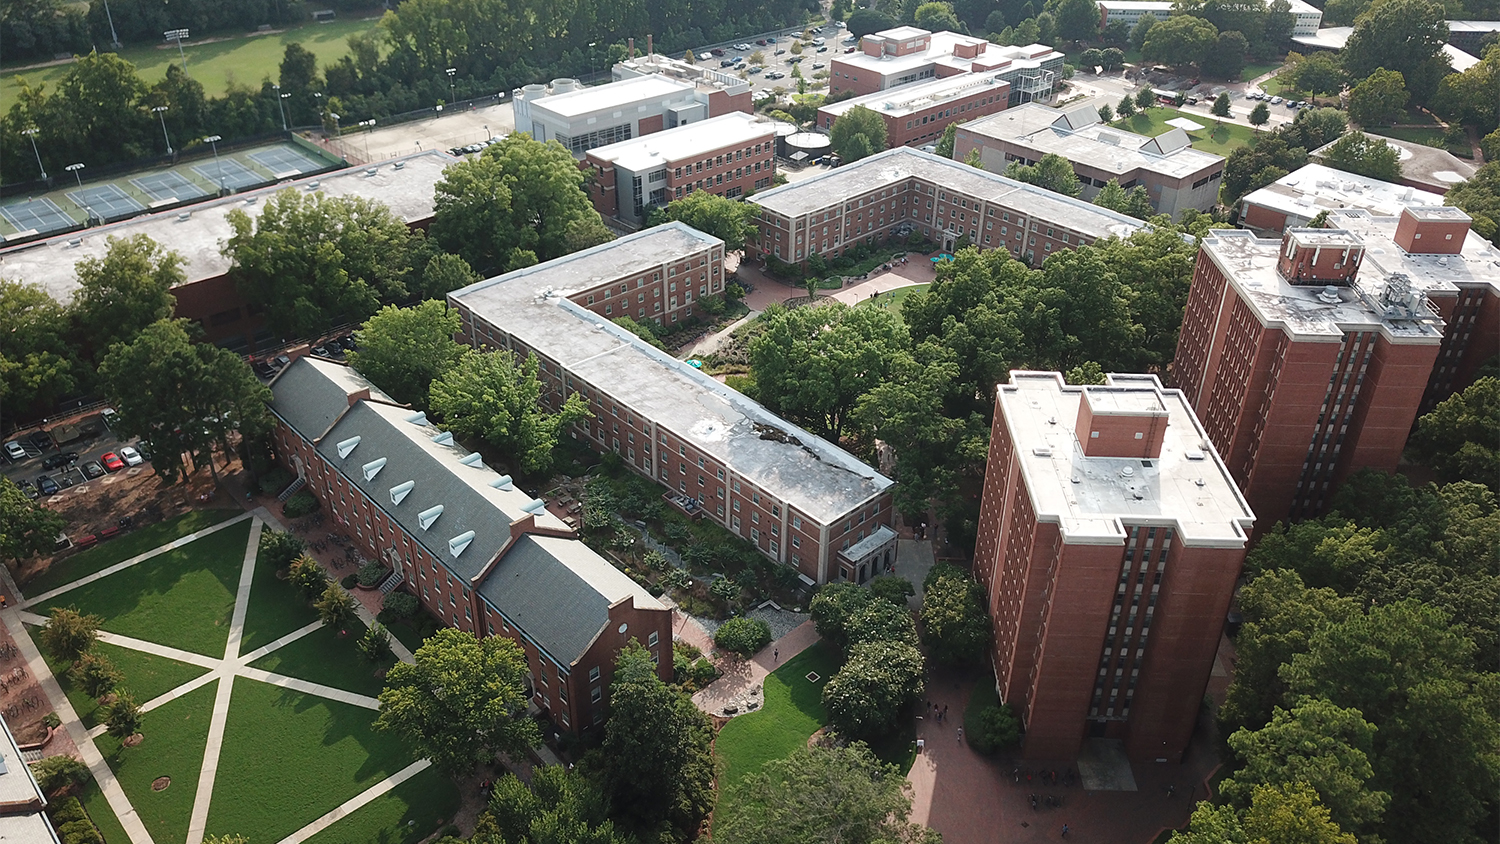 Aerial view of brick housing buildings on campus